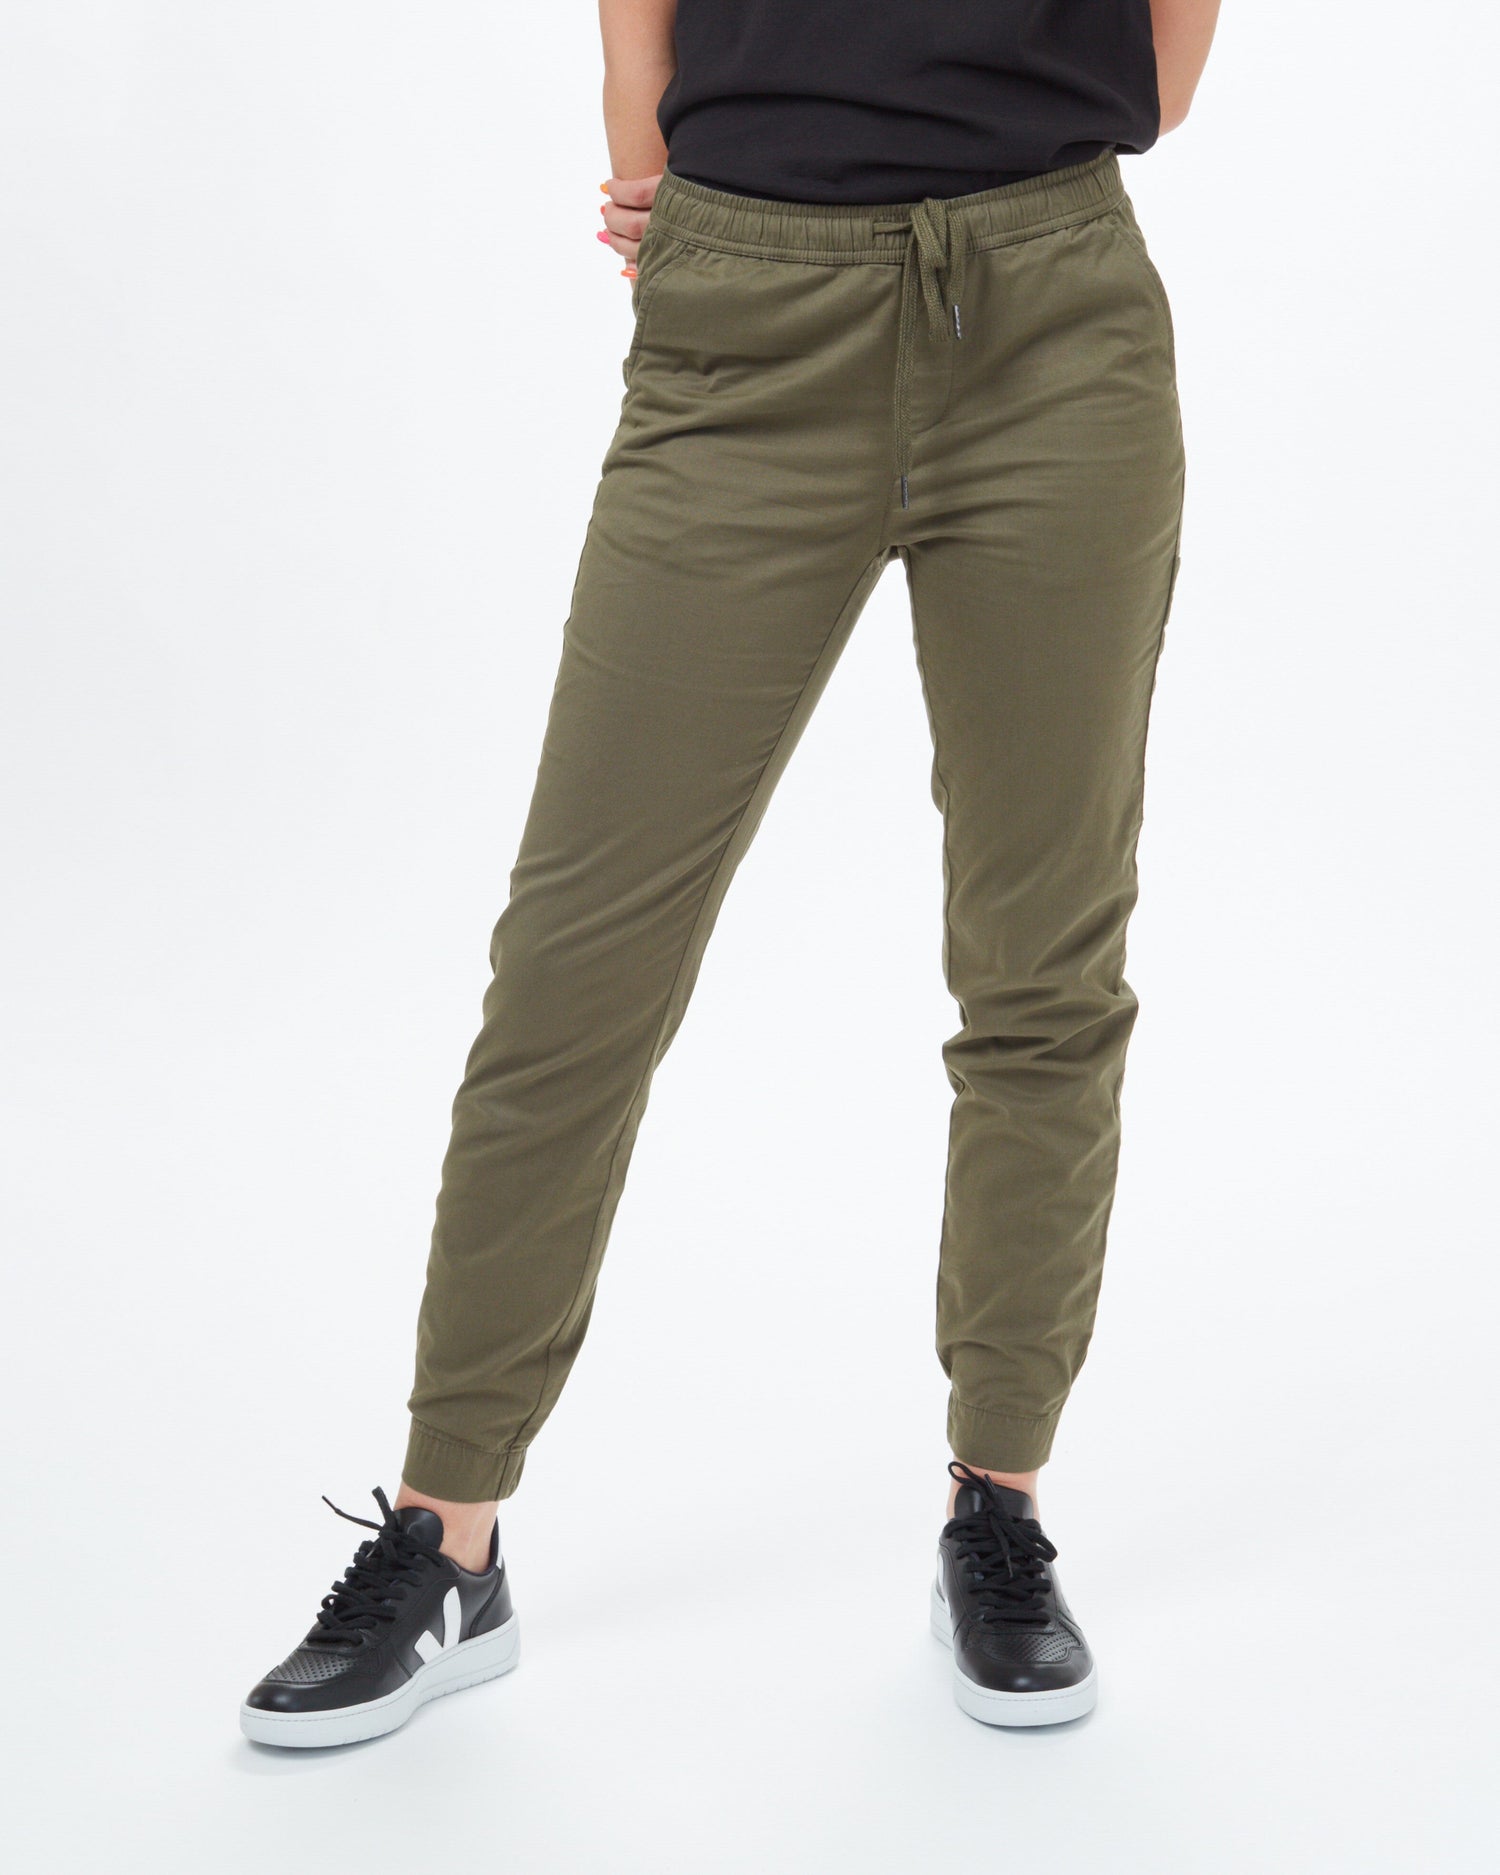 Tentree W's Pacific Jogger - Organic Cotton New Olive Night Green Pants